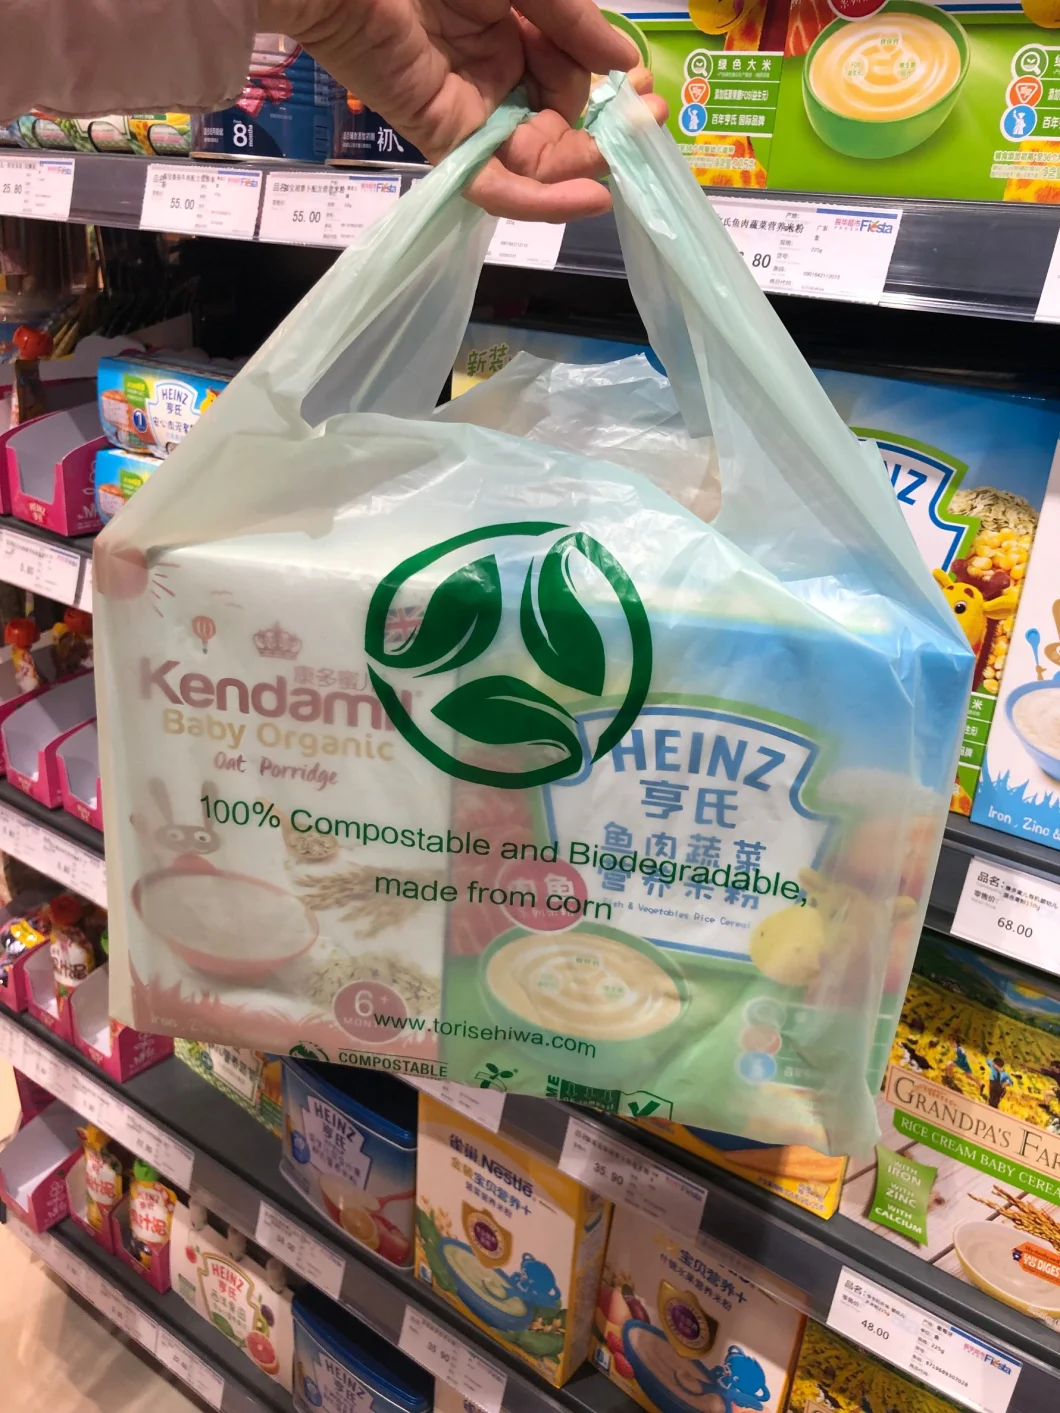 Environmentally Friendly Biodegradable Carry Bags